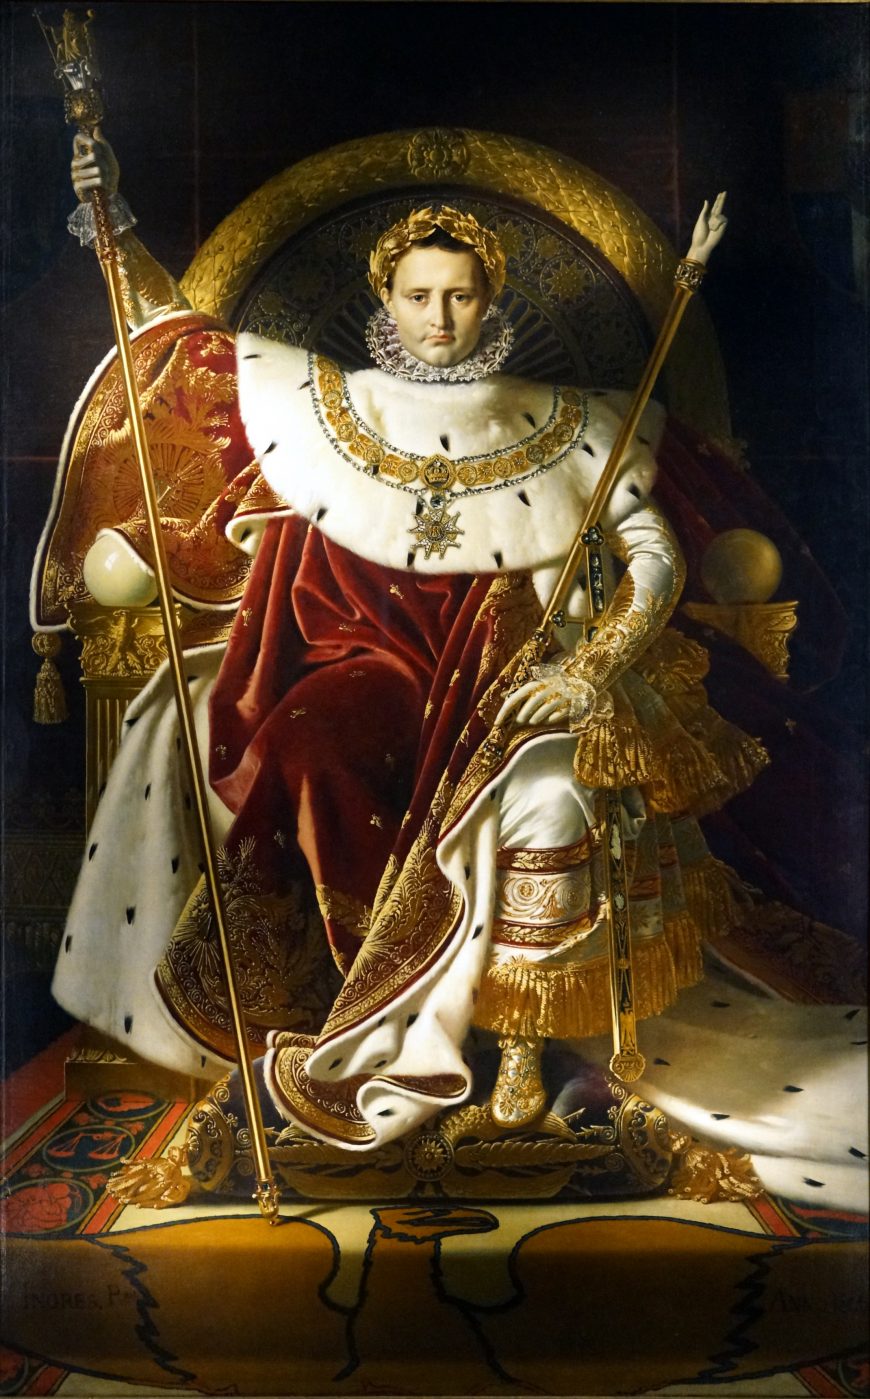 Painting of Napoleon on his Imperial Throne by Jean-Auguste-Dominique Ingres